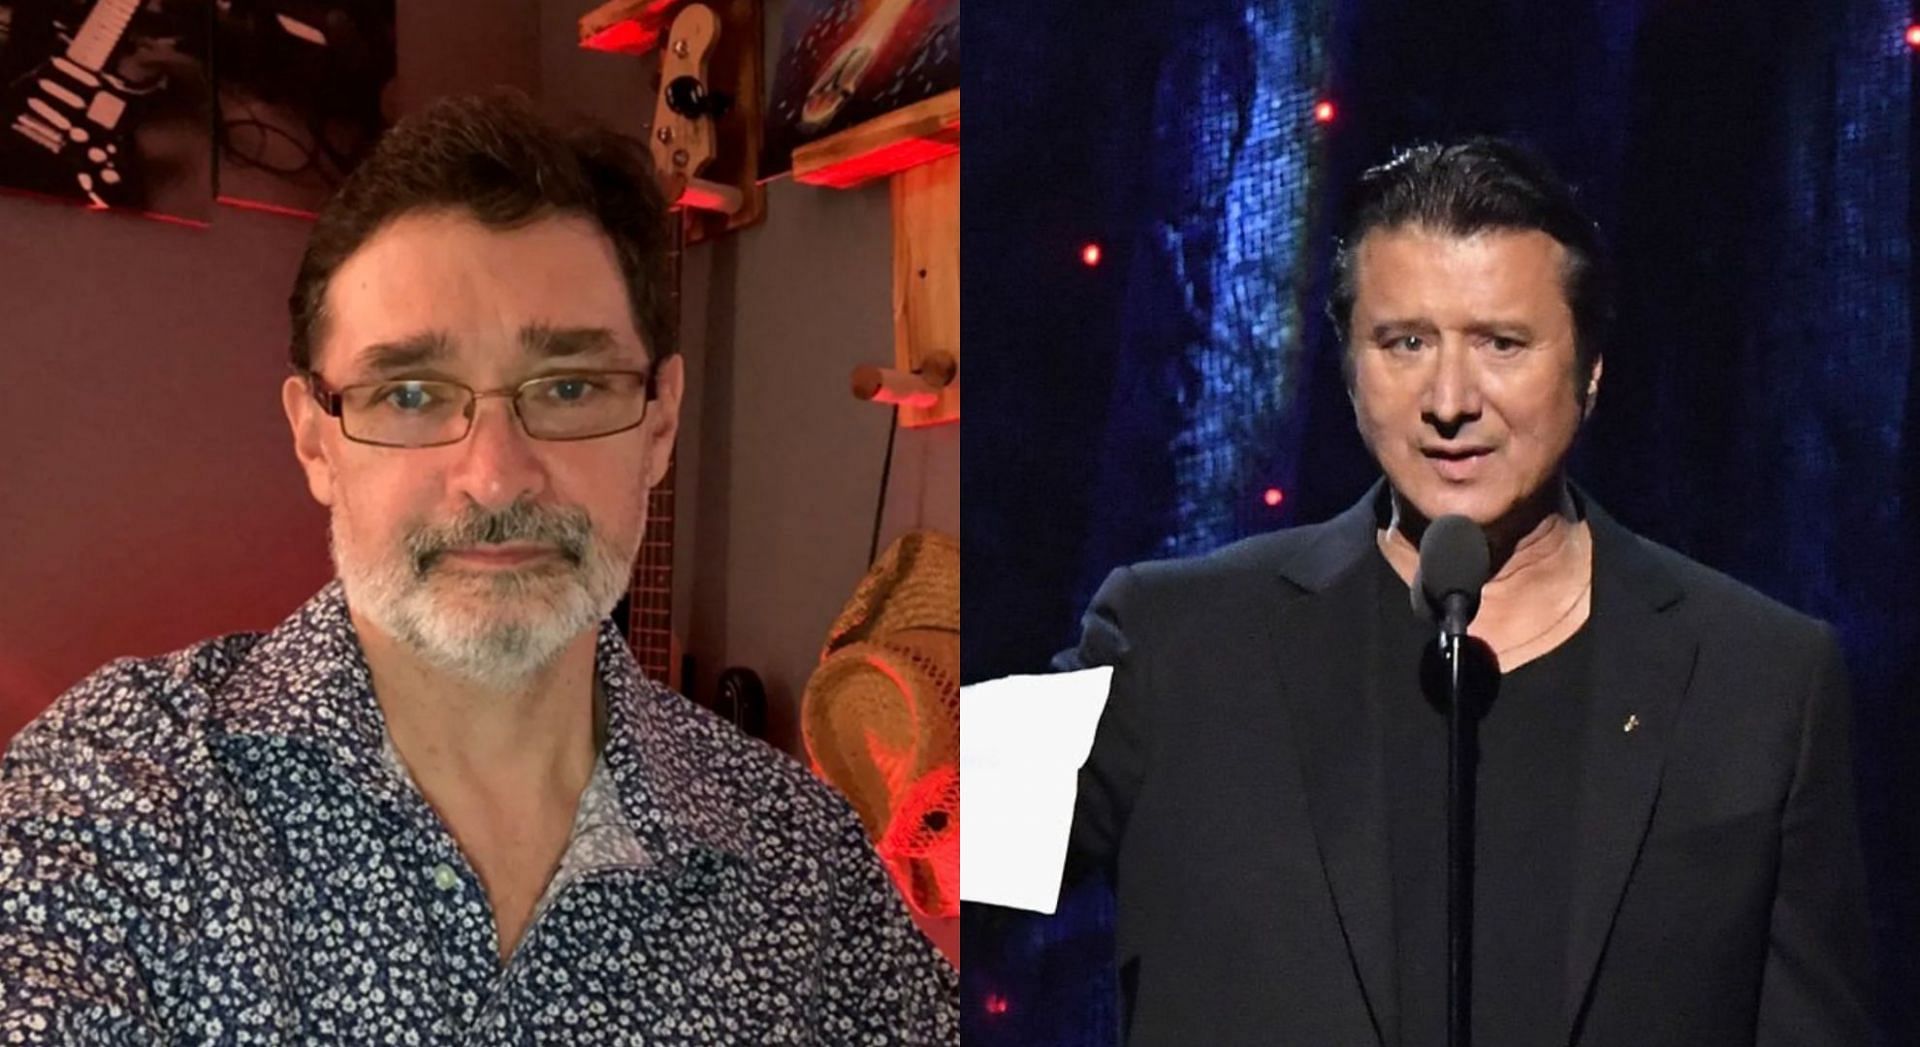 Indiana school janitor Richard Goodall recently earned praise from Steve Perry for covering Journey&#039;s Don&#039;t Stop Believin&#039; (Image via Andy Vermaut/Twitter and Getty Images)